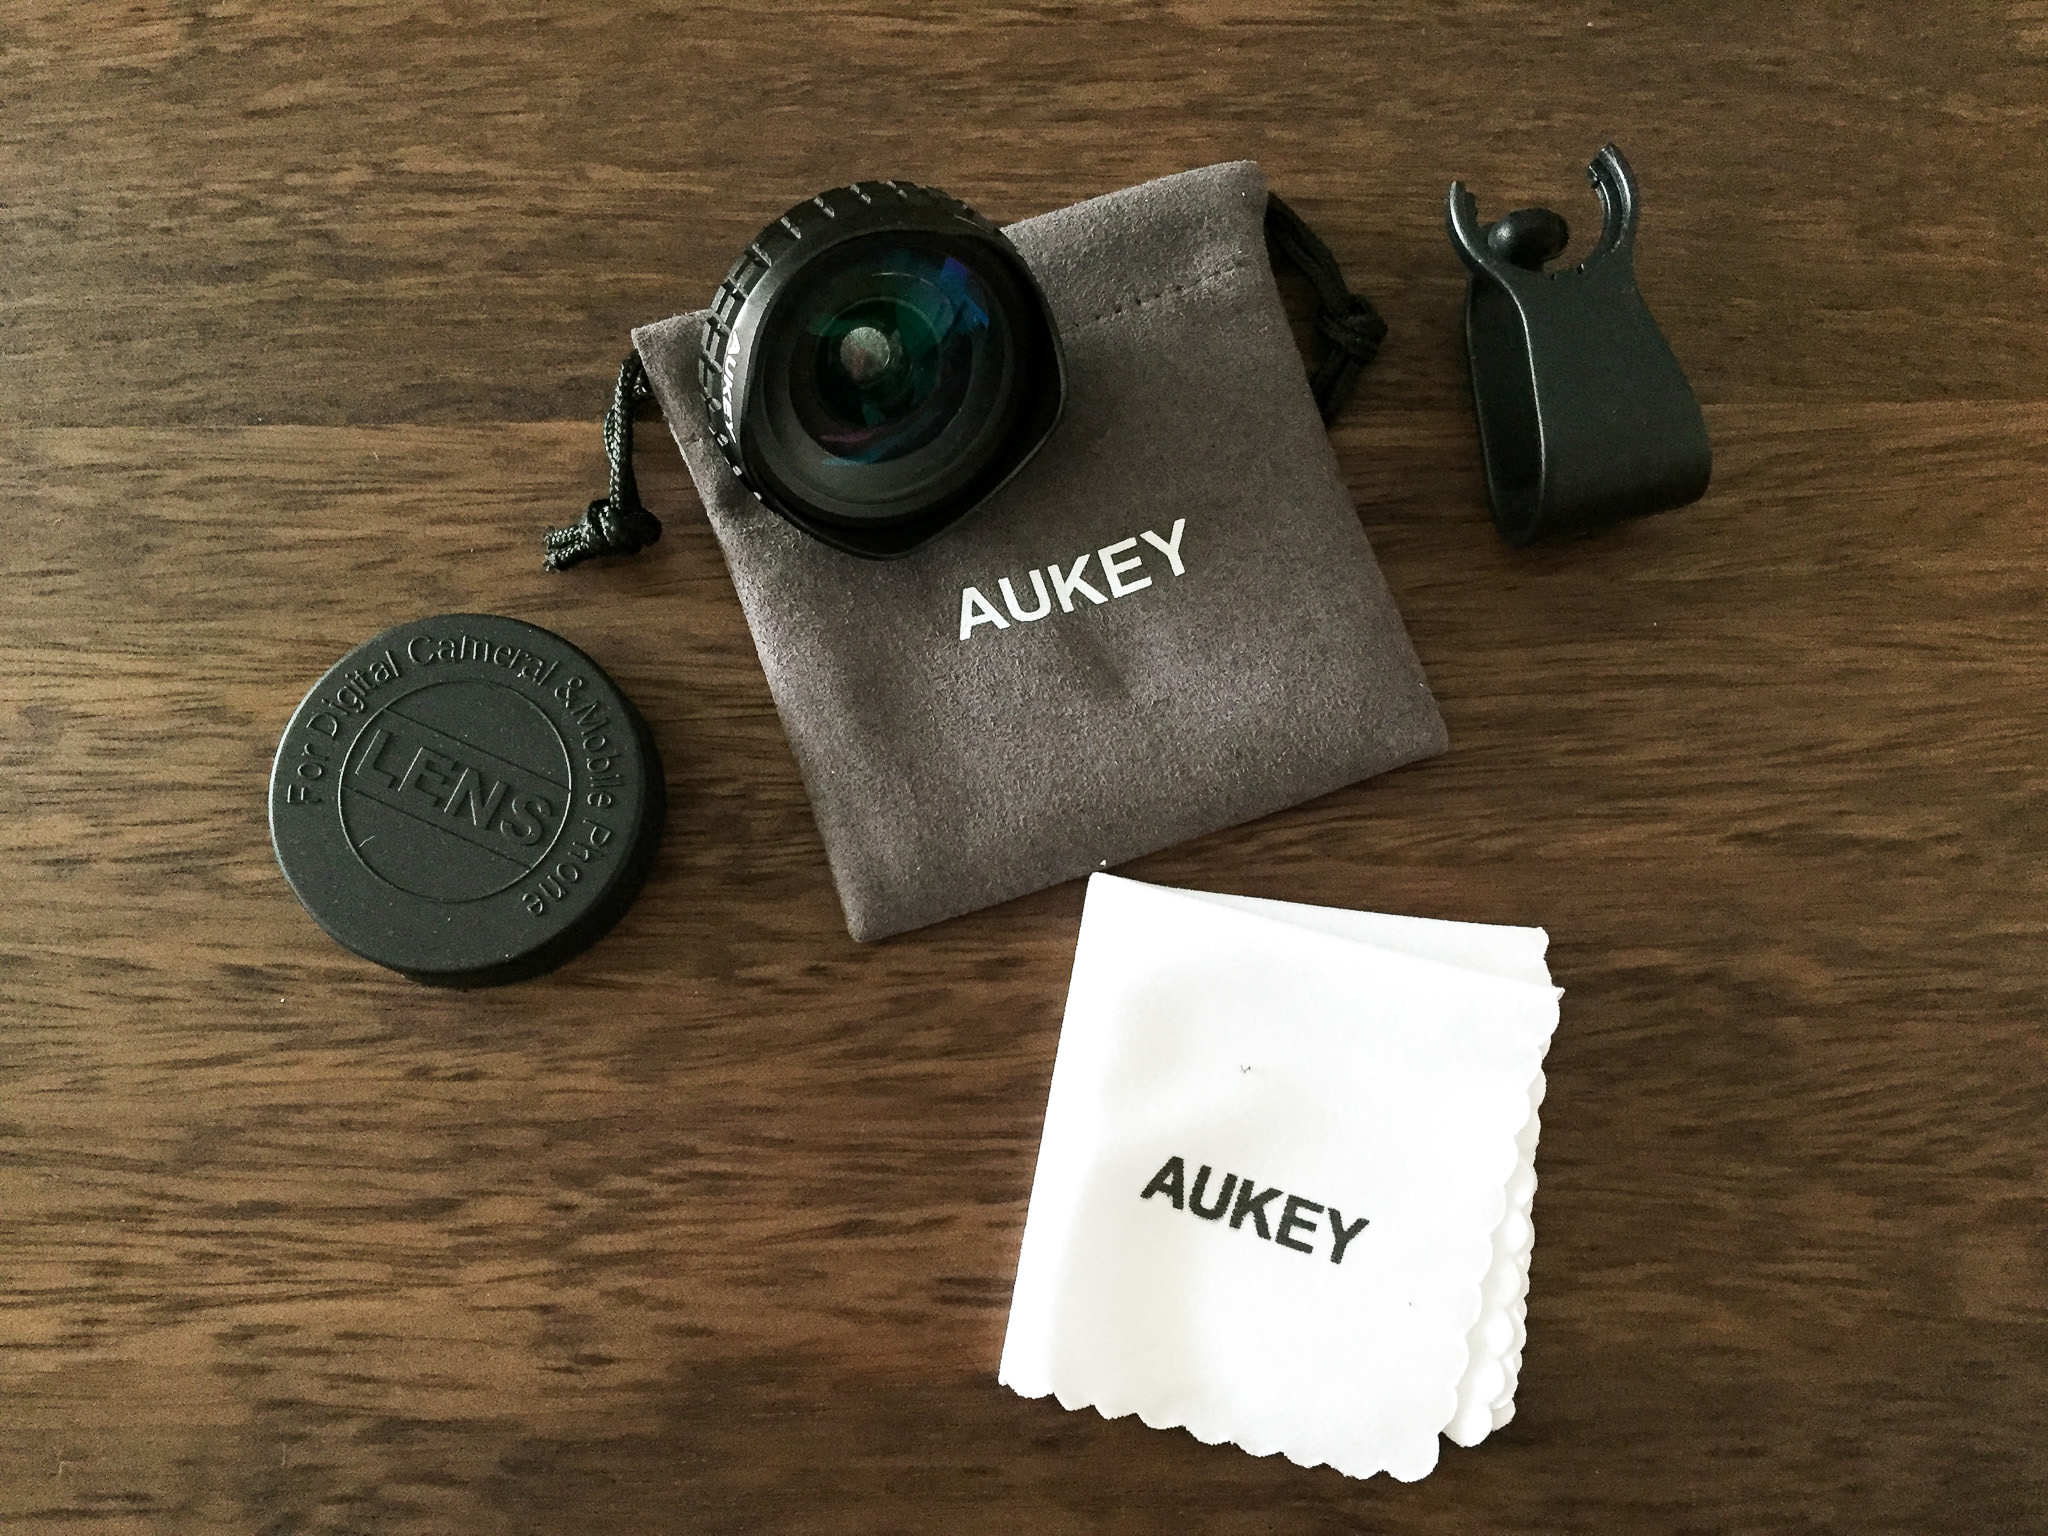 Aukey Phone Camera Review Photography Life